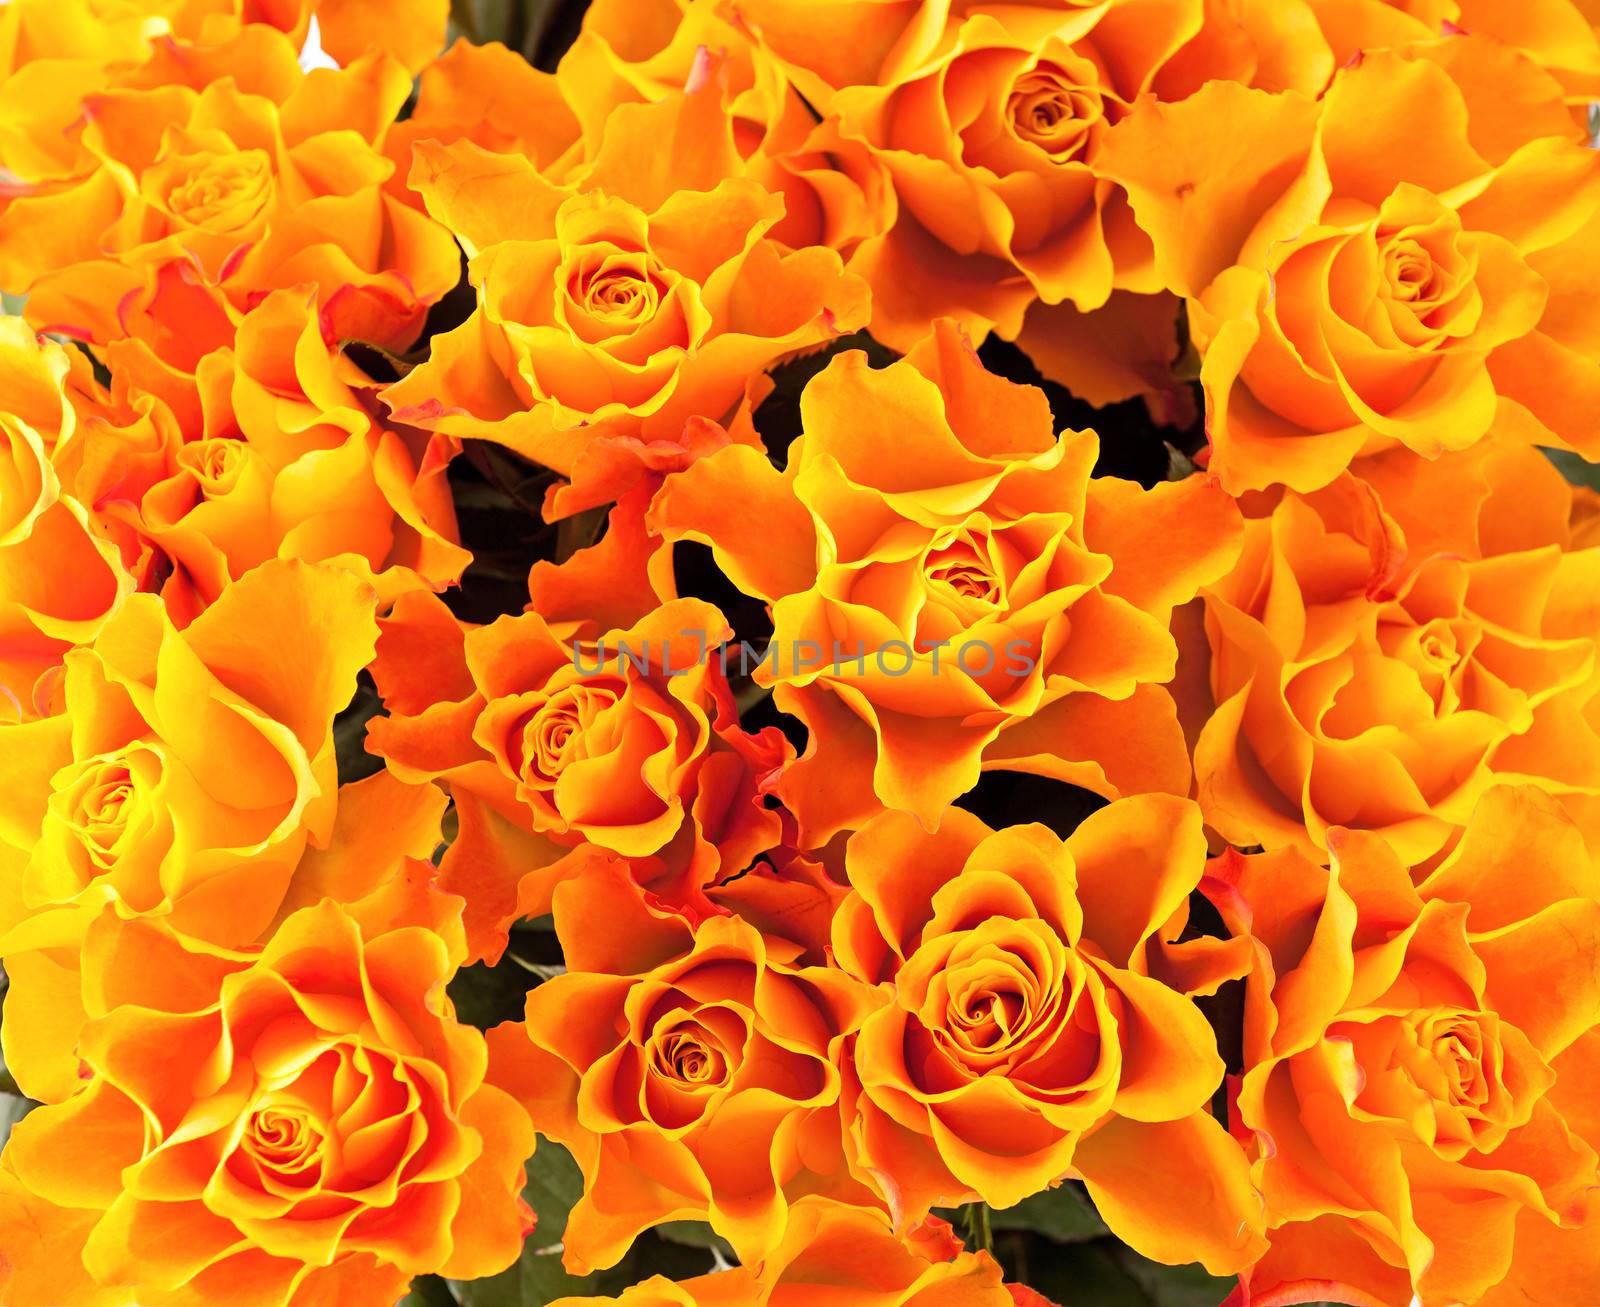 Background of yellow roses by photobac